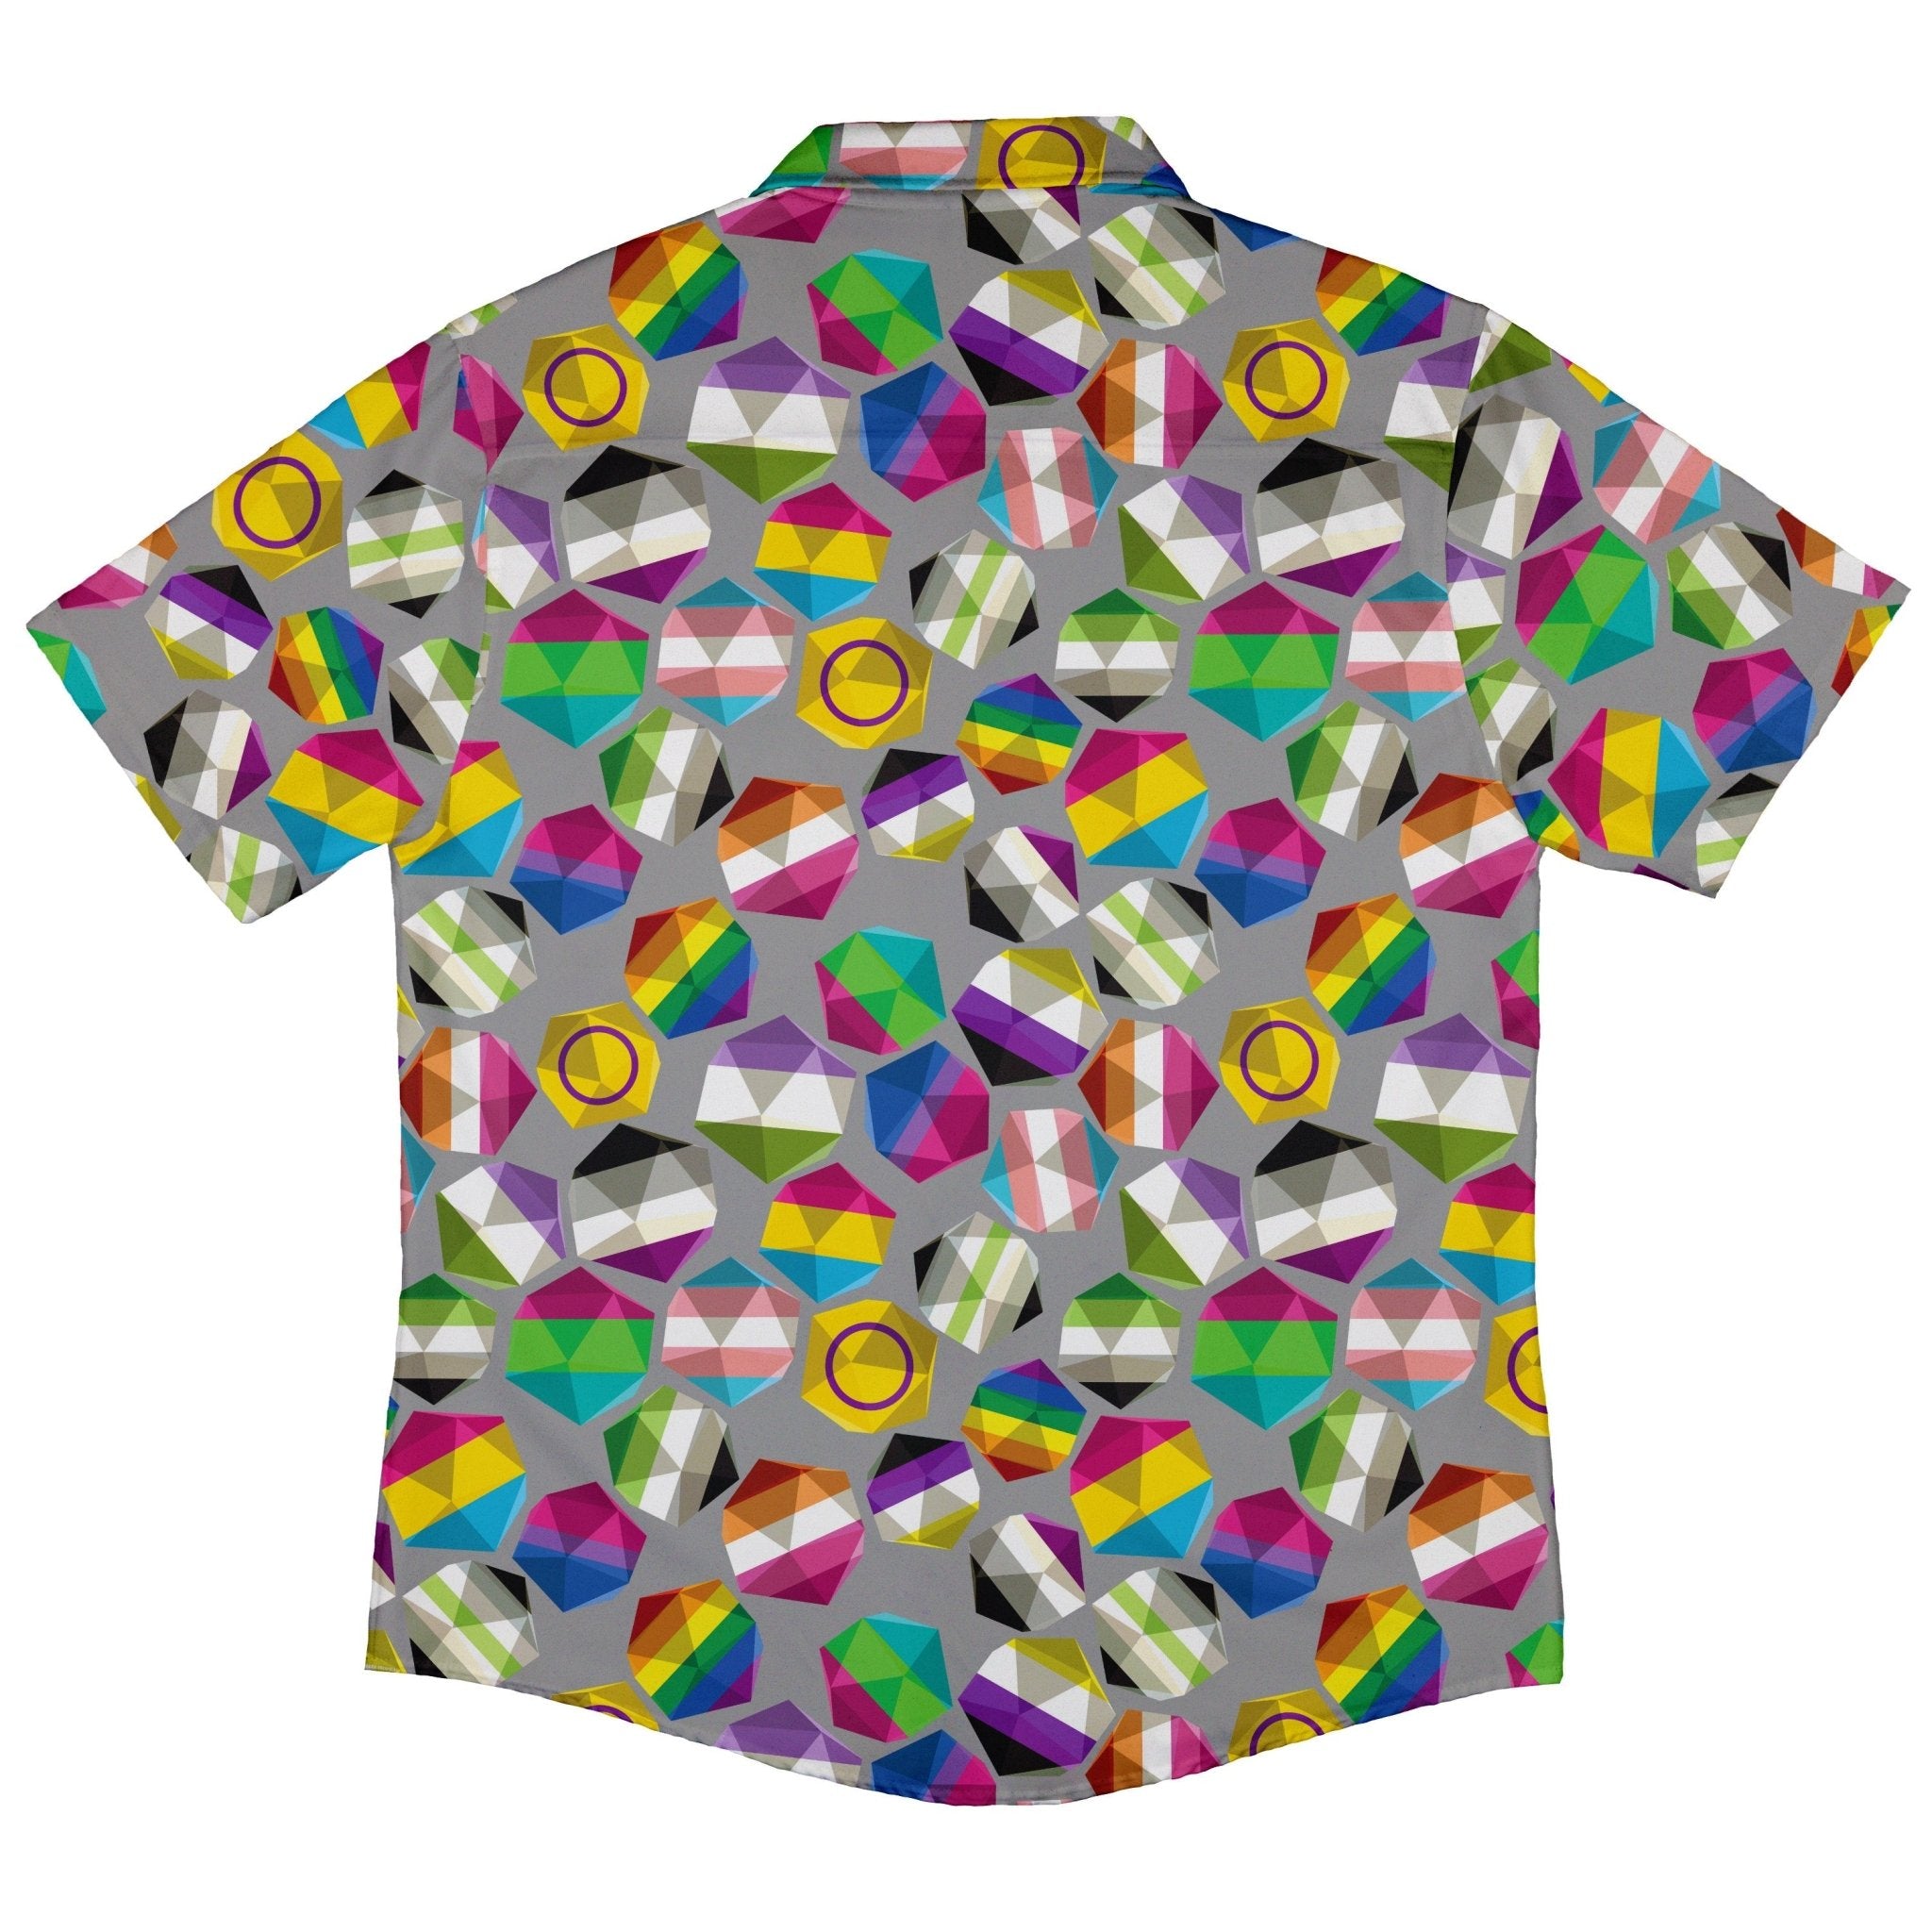 Roll with Pride LGBTQ Dice Dnd Button Up Shirt - adult sizing - dnd & rpg print - Maximalist Patterns